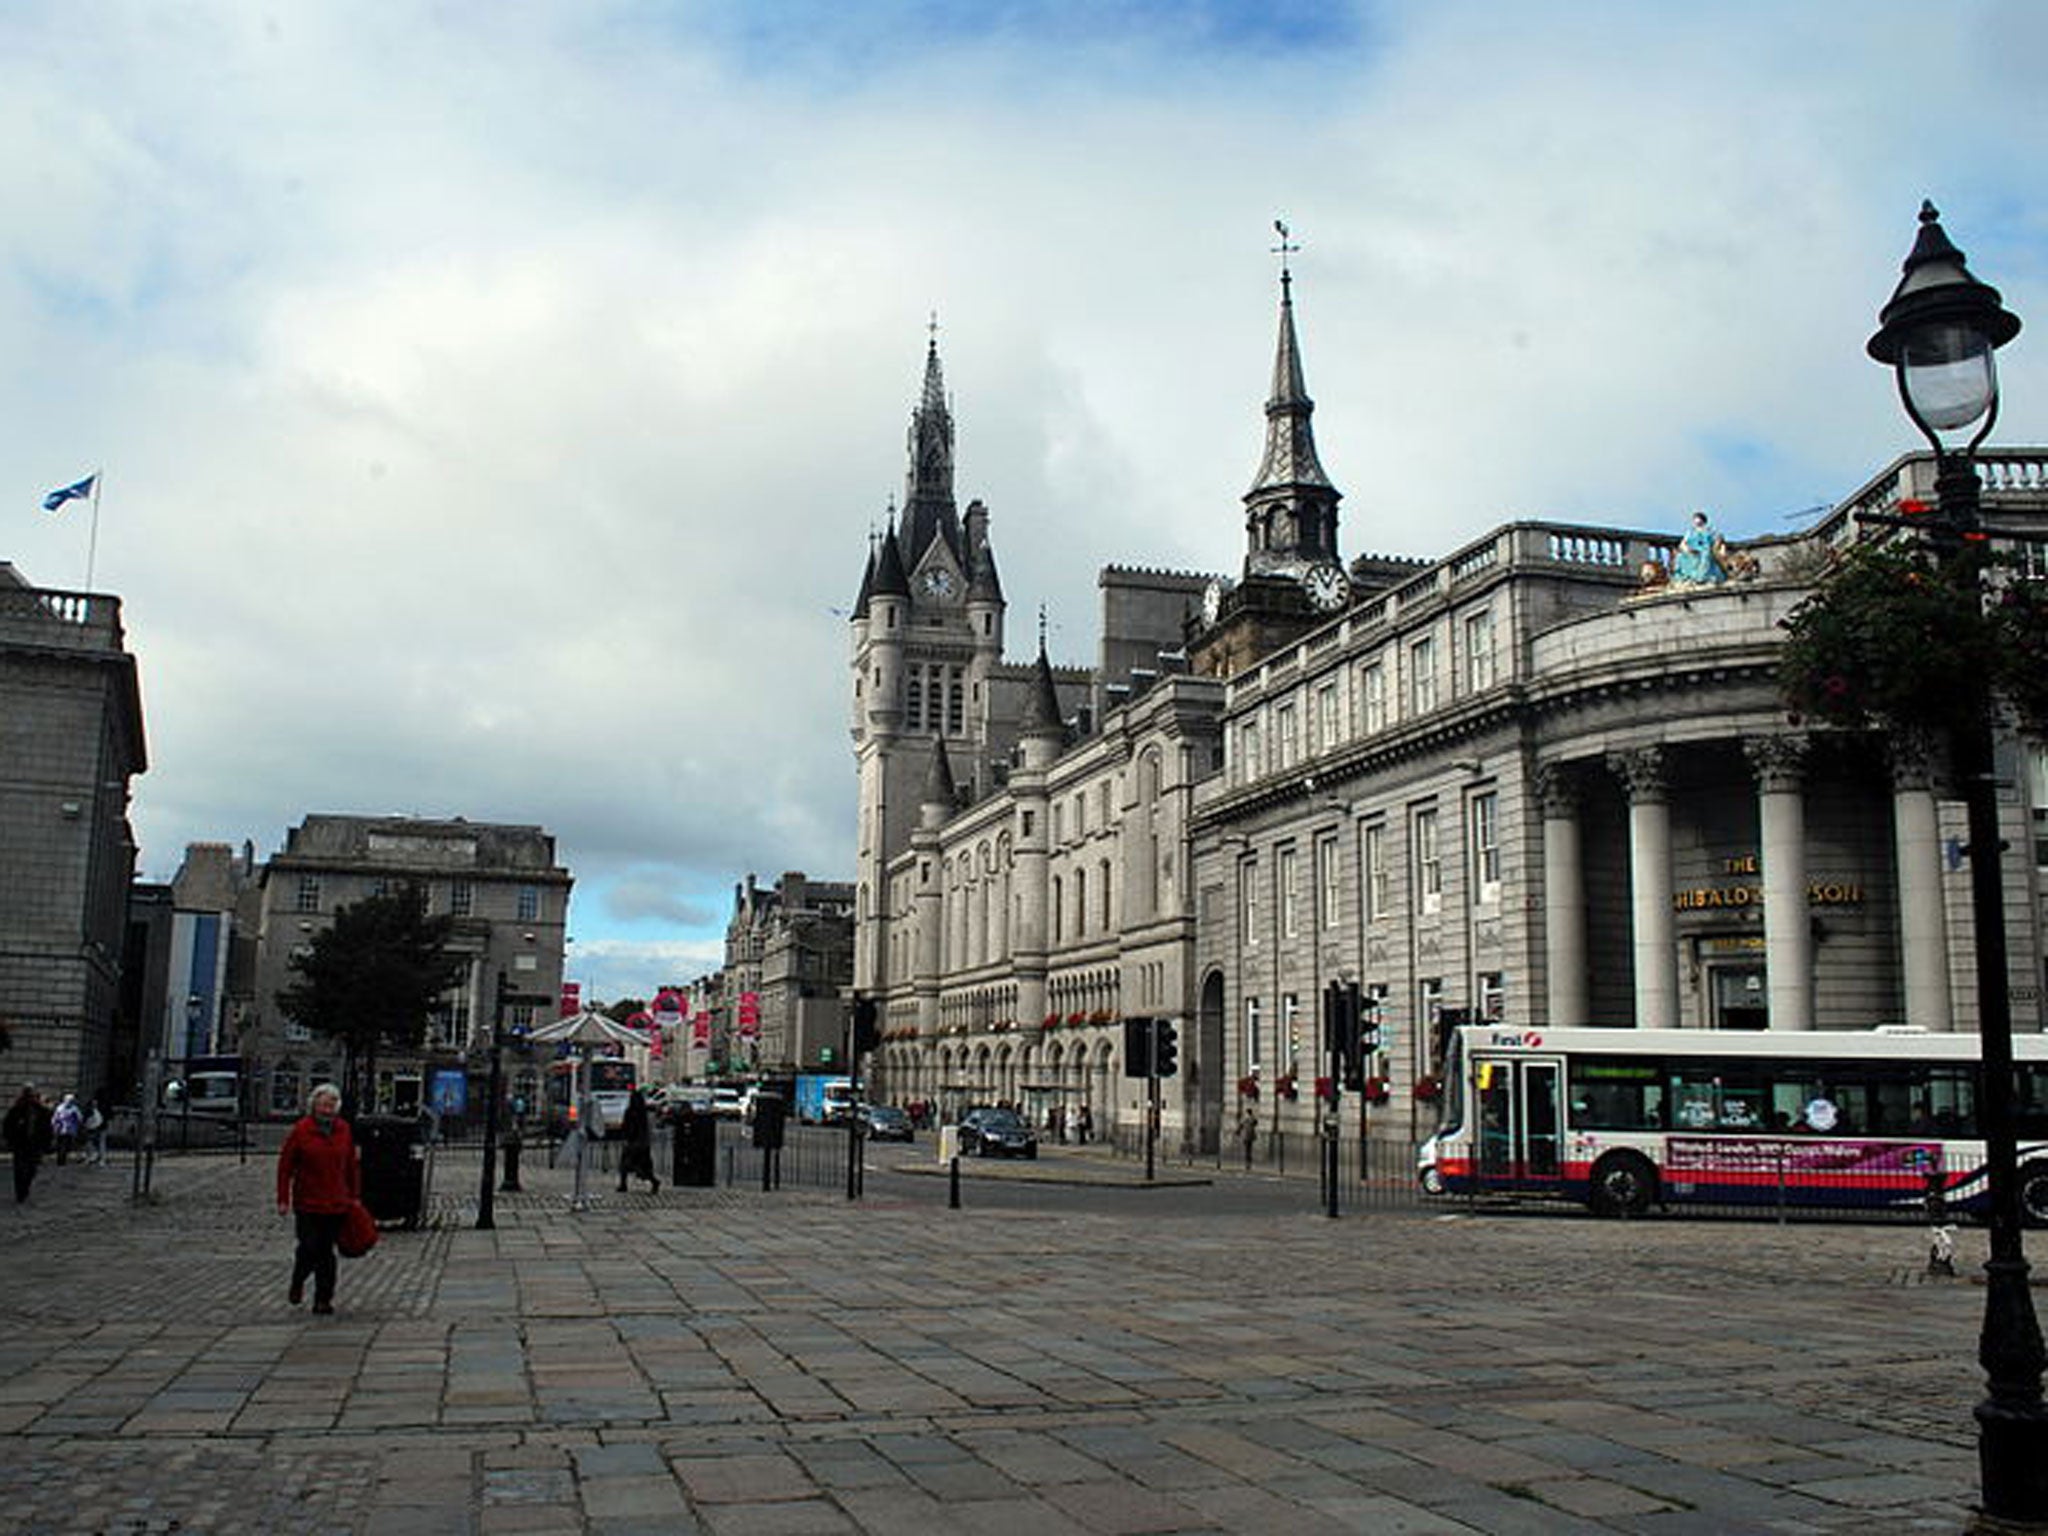 Aberdeen has been voted Scotland's most dismal city